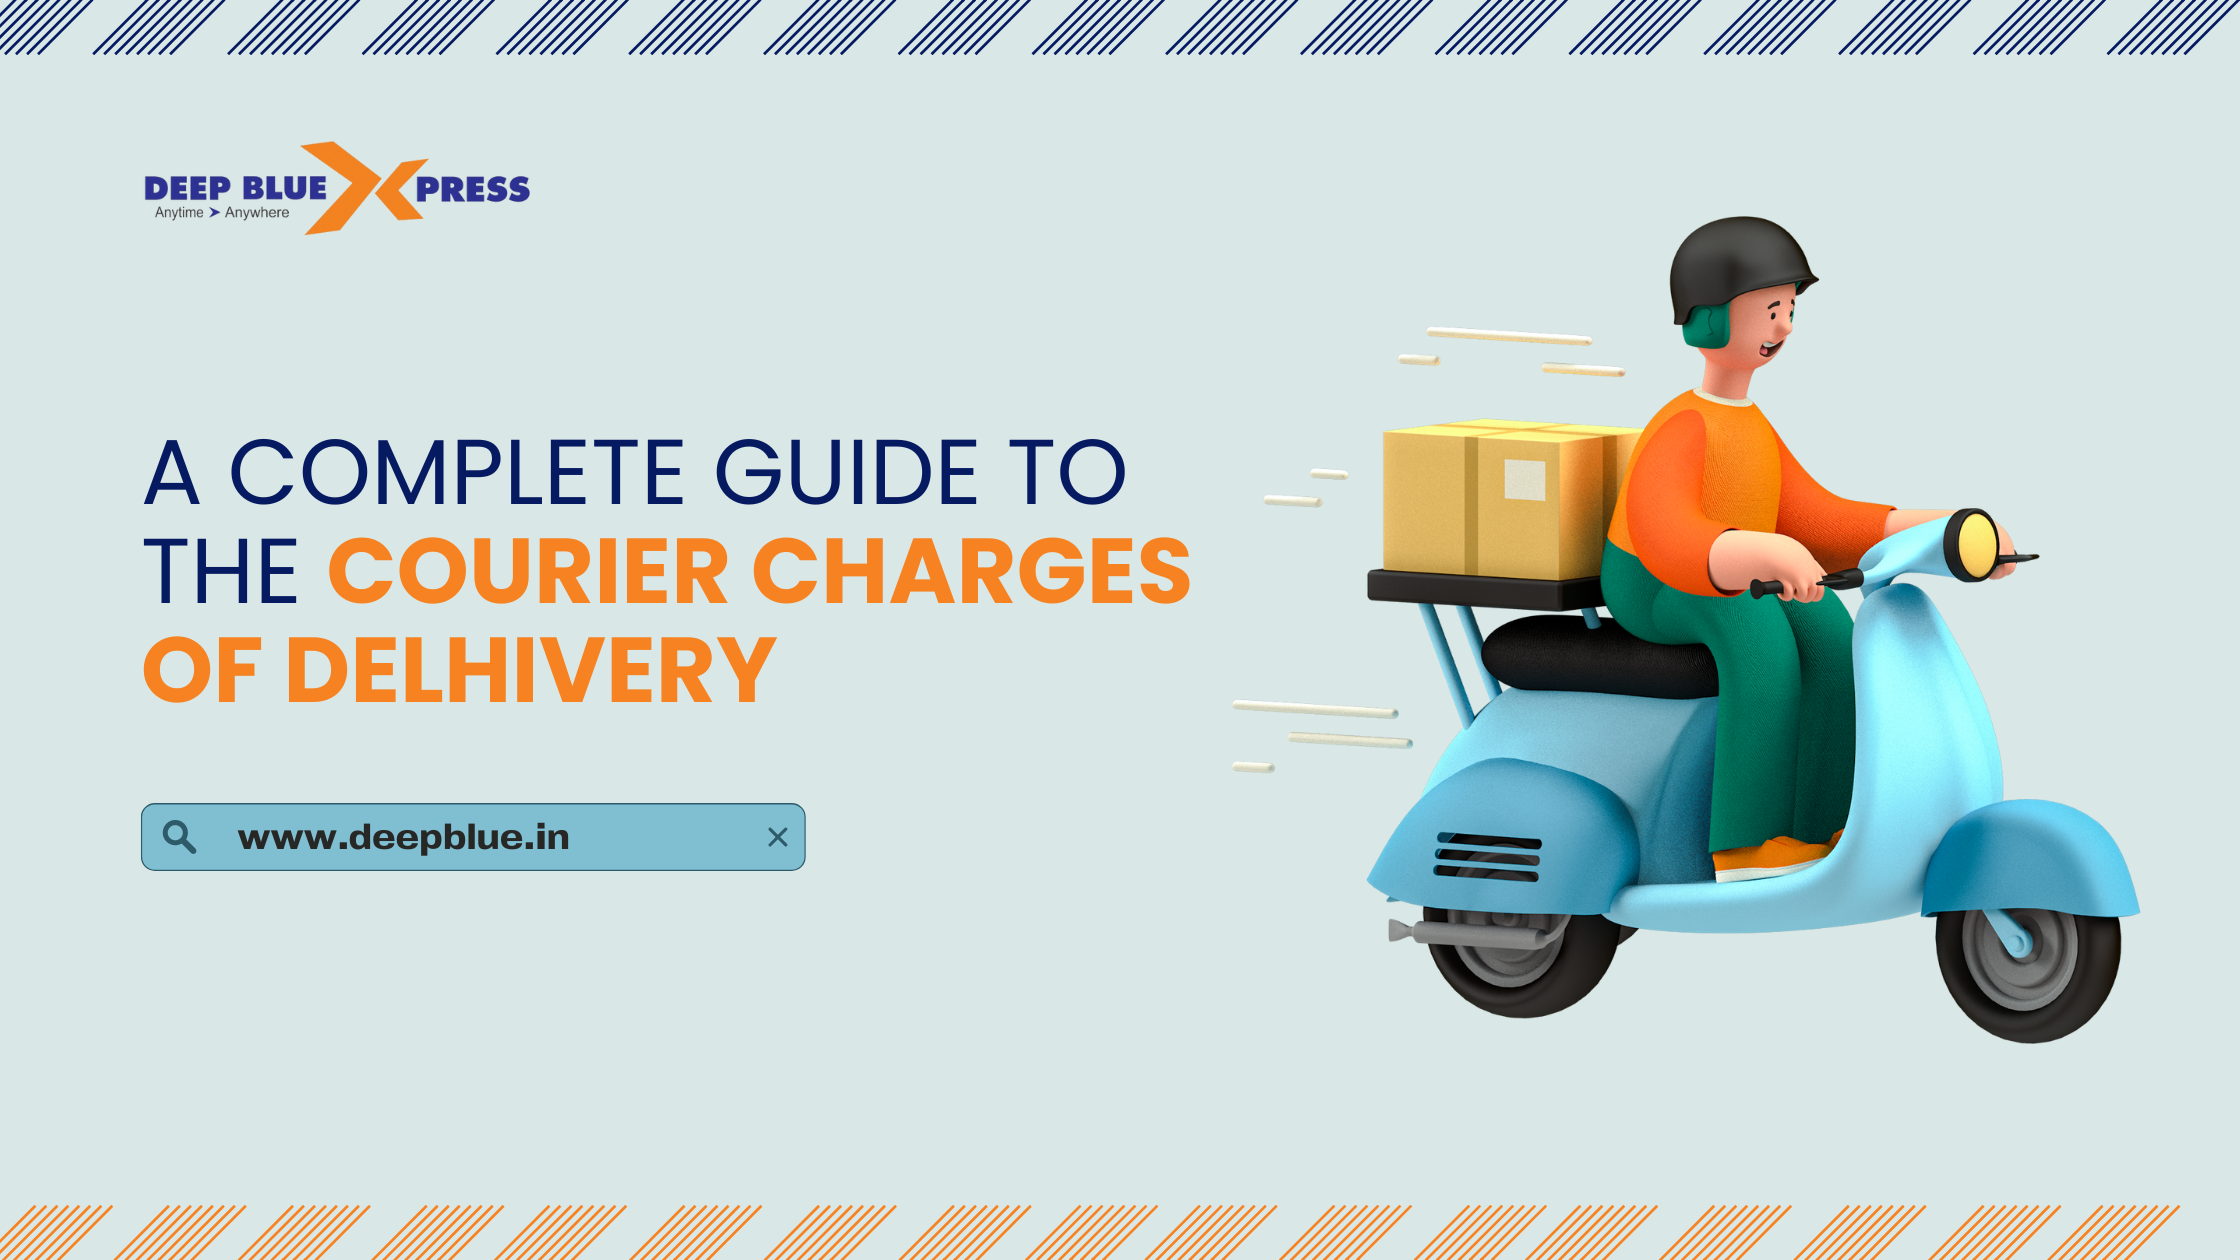 A Complete Guide to Courier Charges of Delhivery